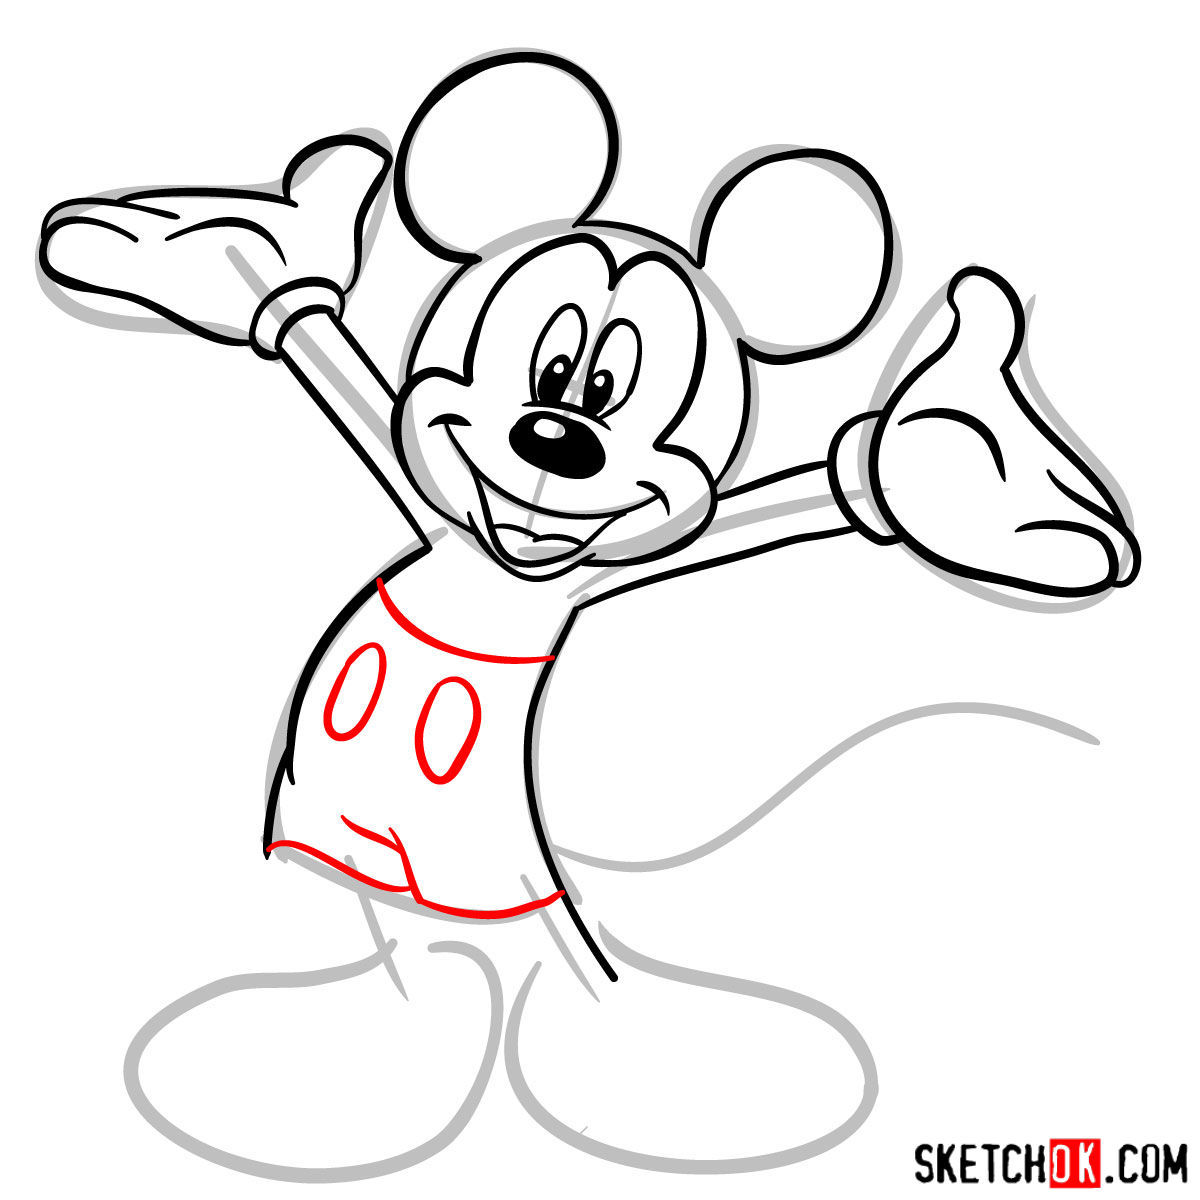 Drawing House Mickey Mouse - Cartoon Sketches Of Mickey Mouse - Free  Transparent PNG Download - PNGkey